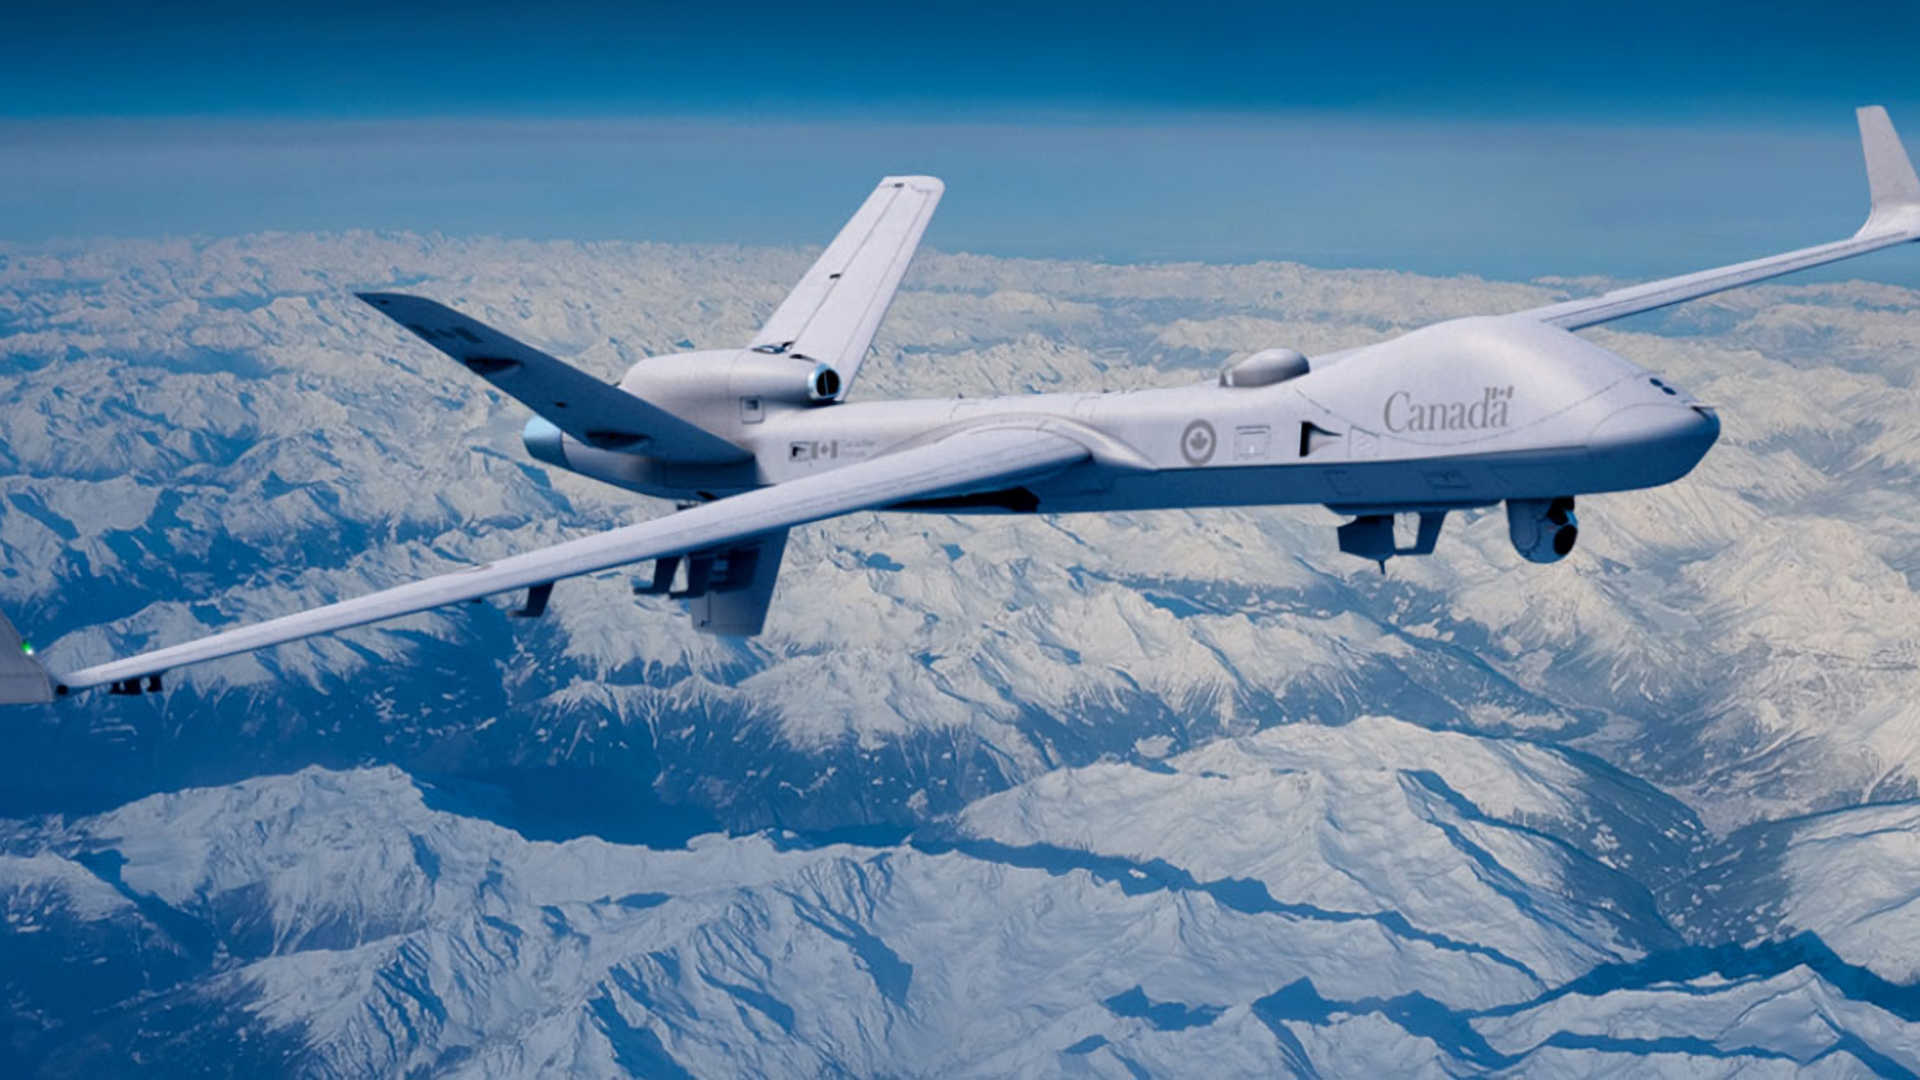 Remotely Piloted Aircraft System flying over land